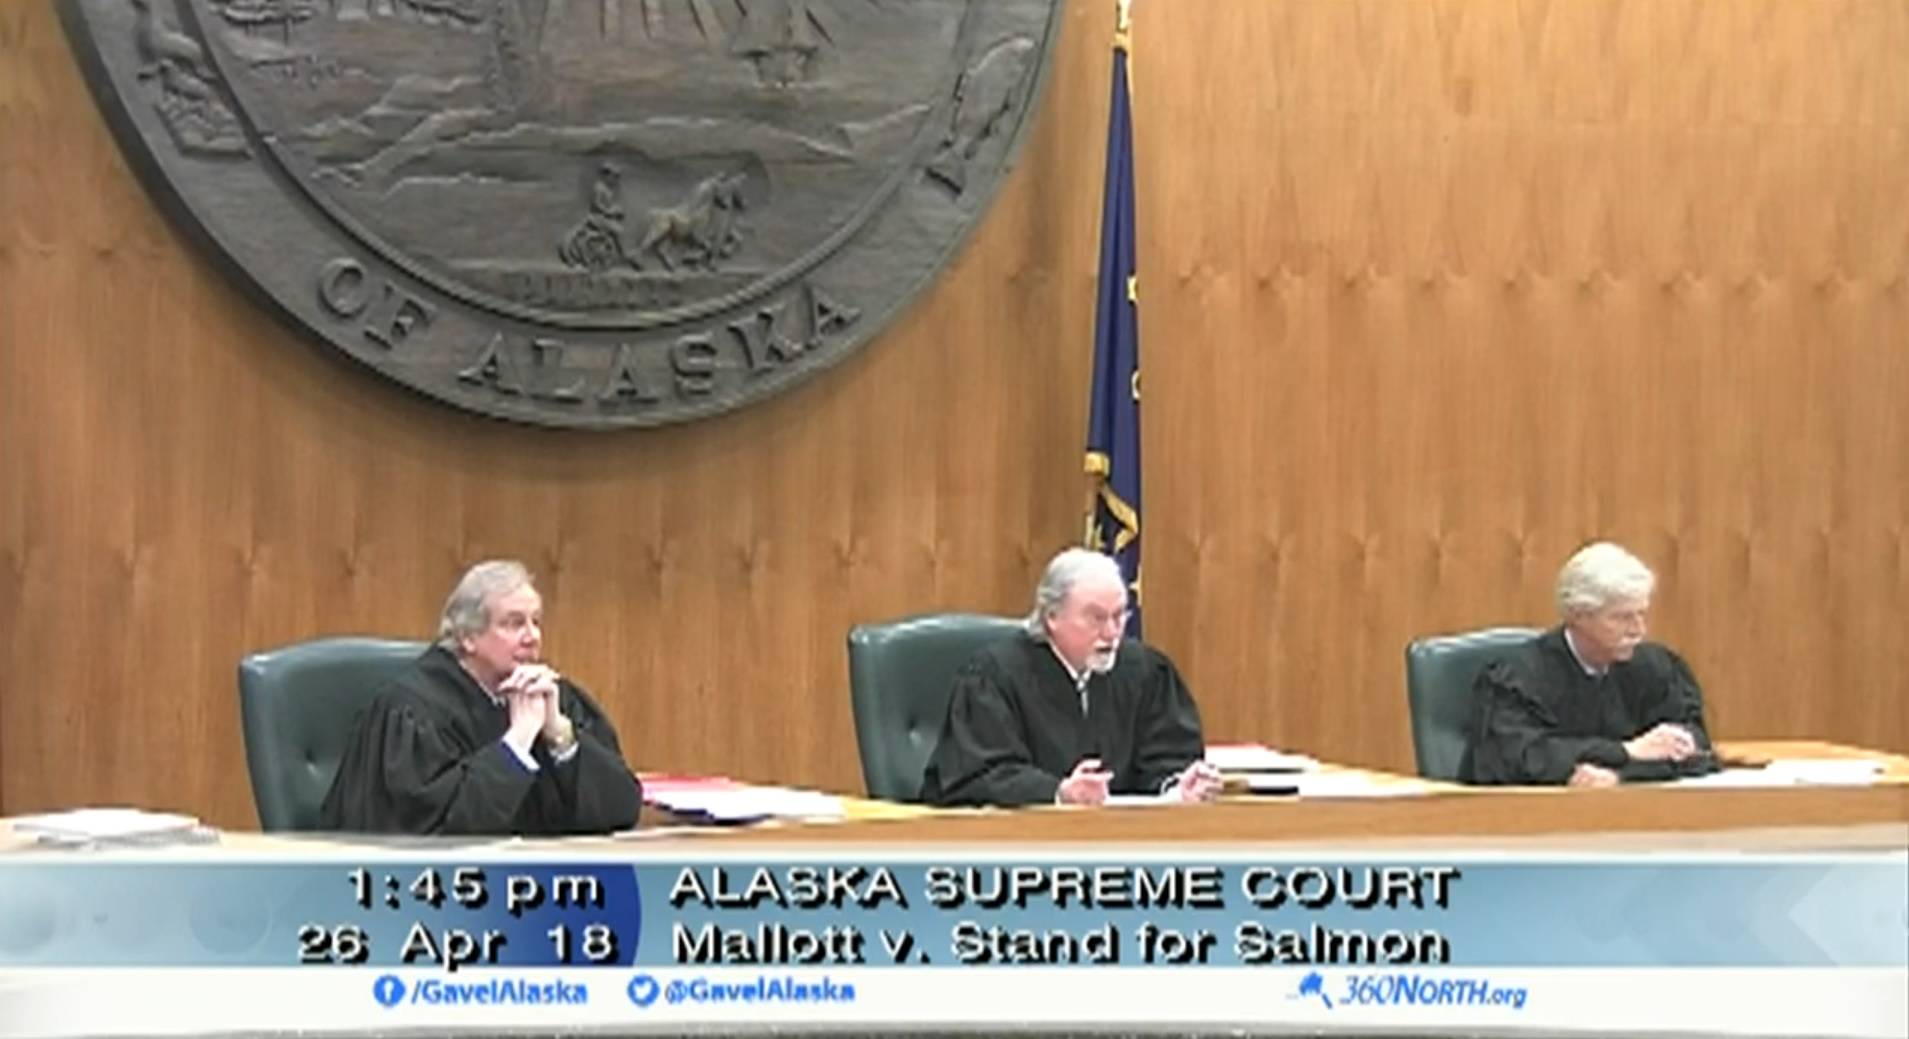 In a screenshot from a video feed provided by 360 North, justices of the Alaska Supreme Court hear oral arguments Thursday, April 26, 2018 on the case Mallott v. Stand for Salmon in Anchorage. (Video capture)